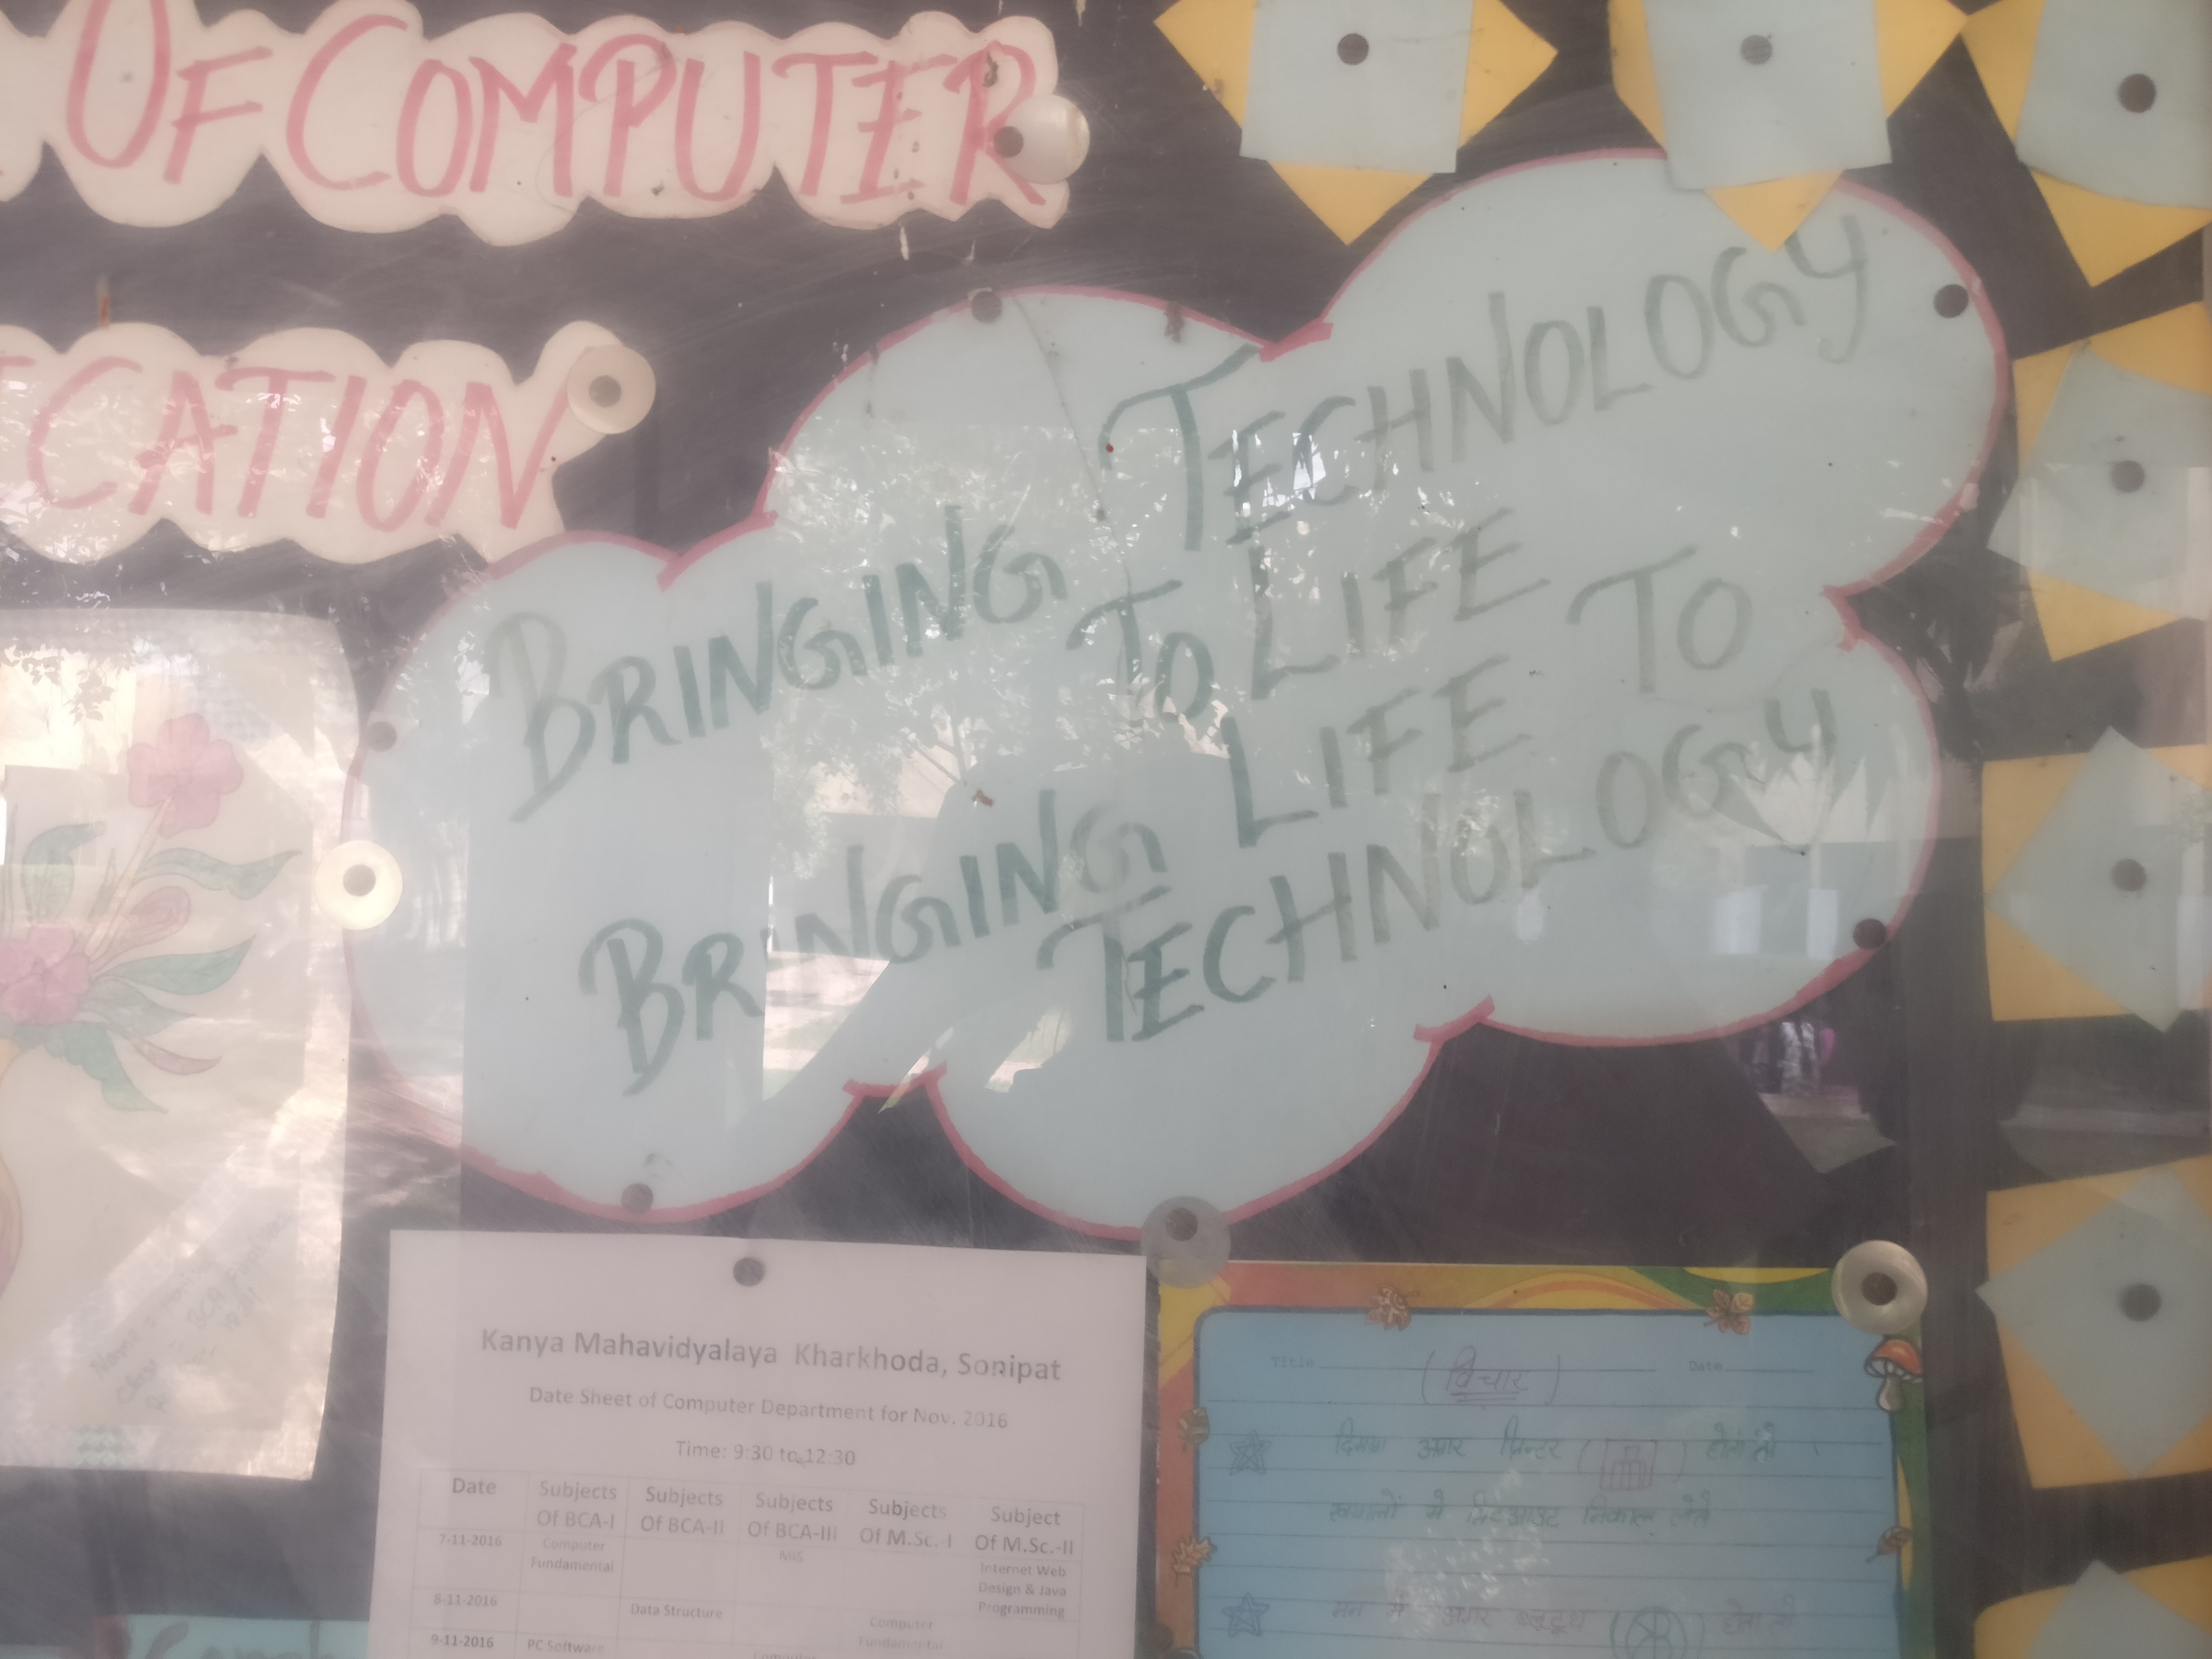 A sign on technology and life on a board in a college